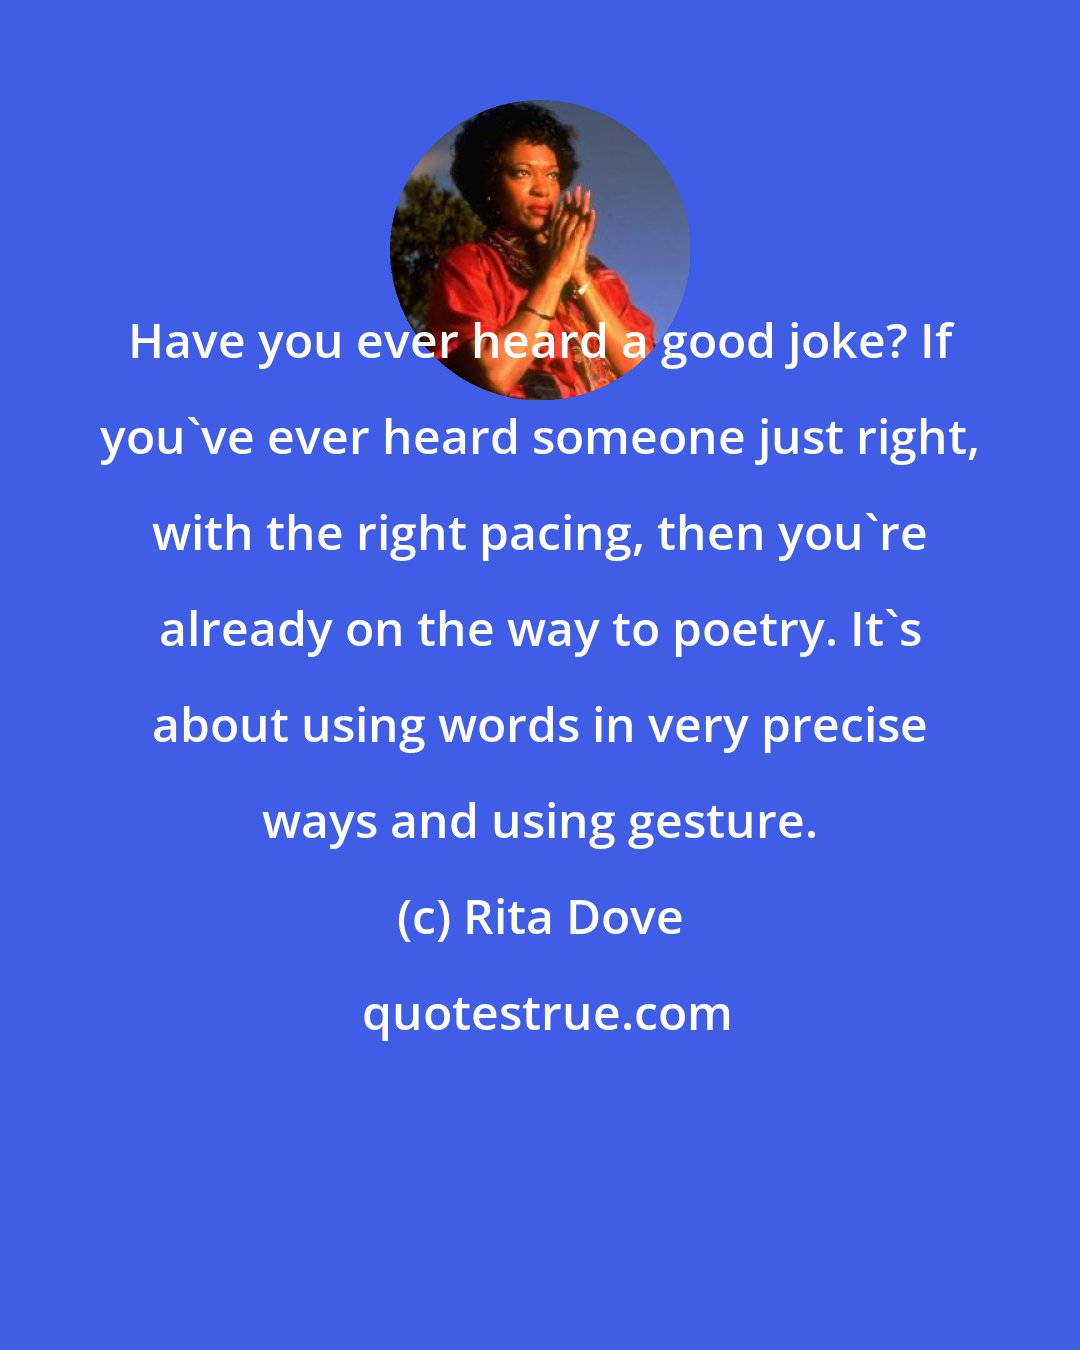 Rita Dove: Have you ever heard a good joke? If you've ever heard someone just right, with the right pacing, then you're already on the way to poetry. It's about using words in very precise ways and using gesture.